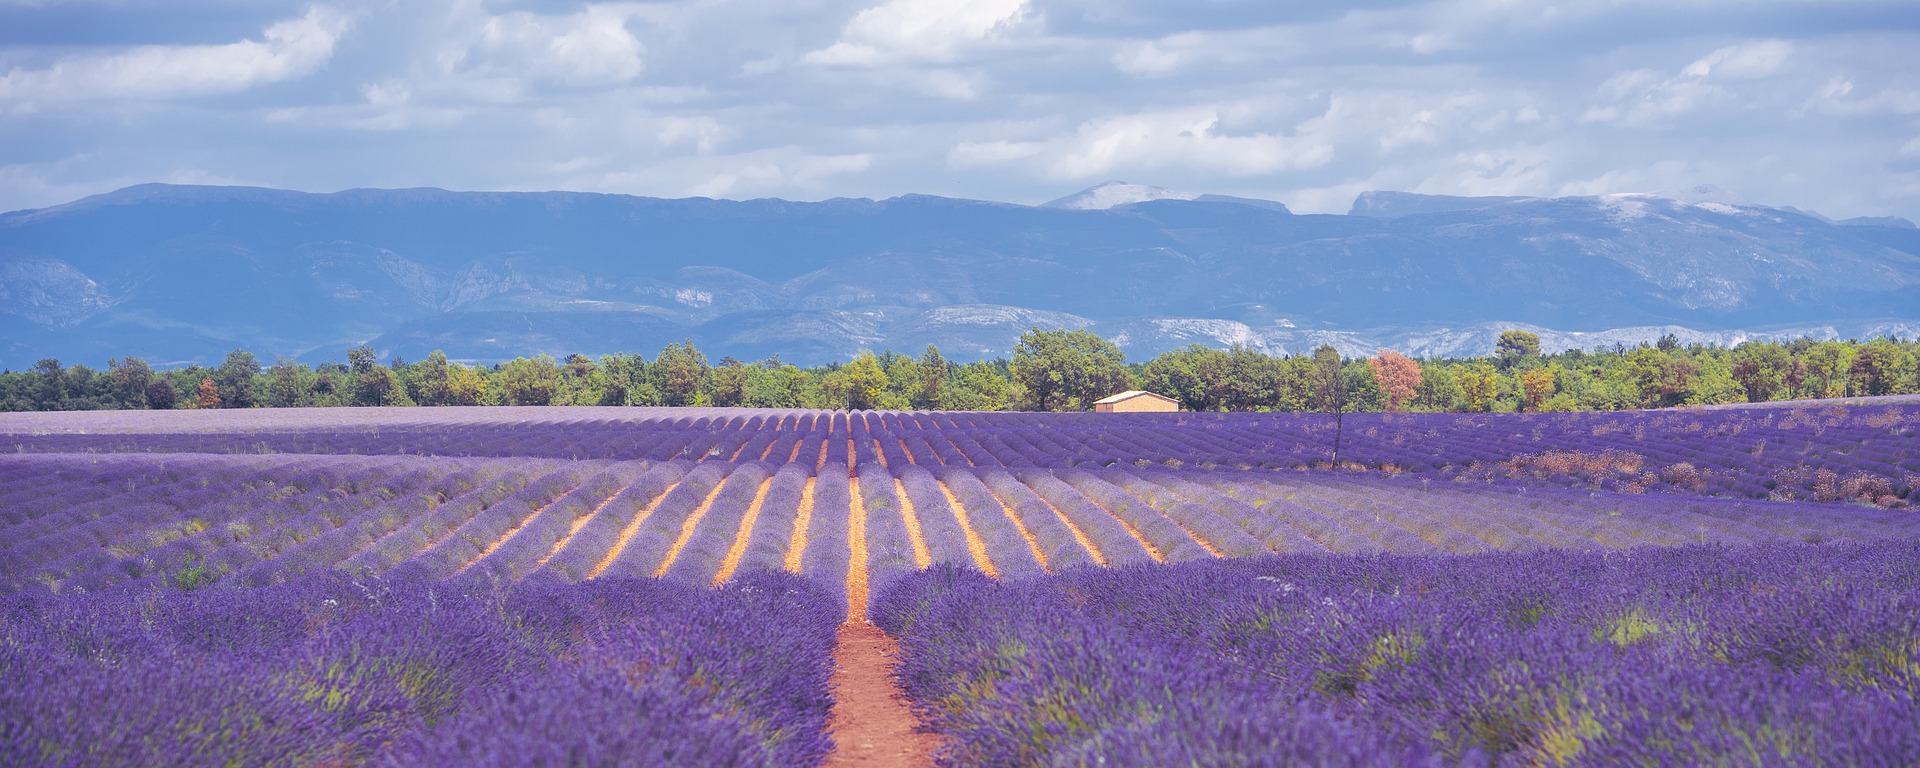 A violet lavender field to illustrate popularity of lavender field tours France